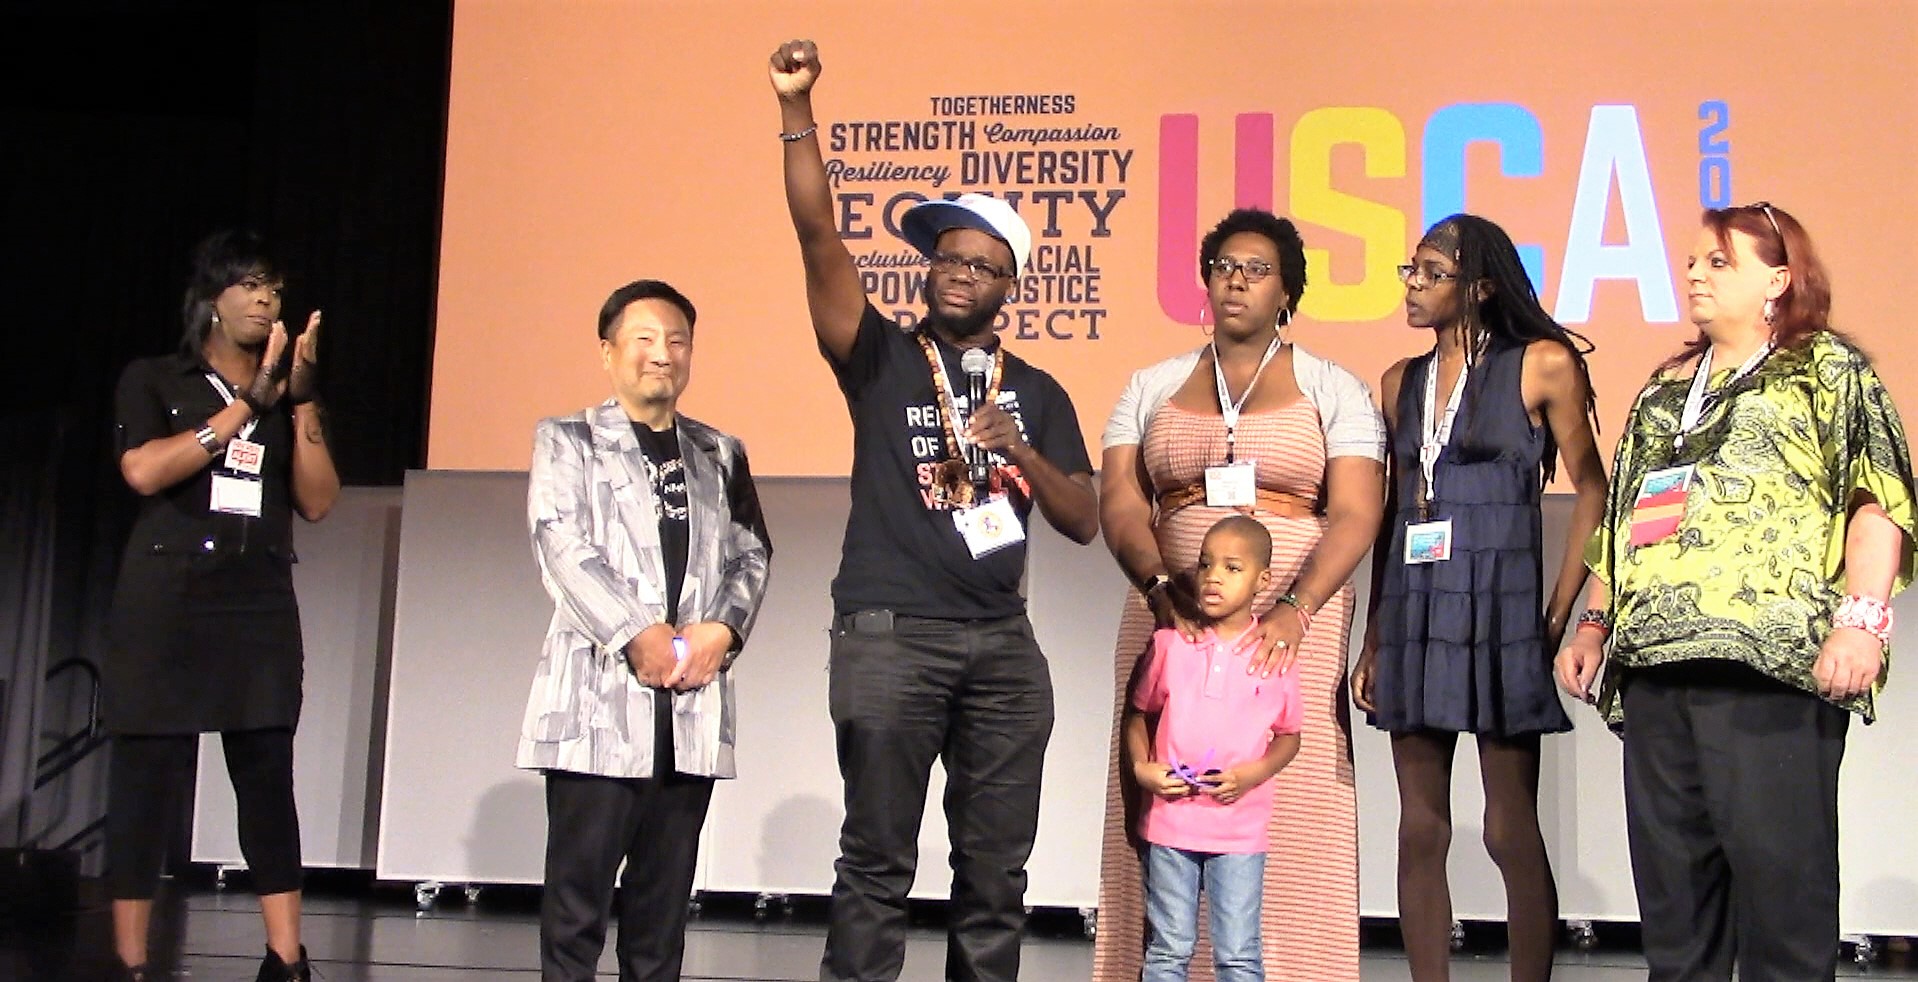 Watch: USCA Plenary Halted by Trans Activists